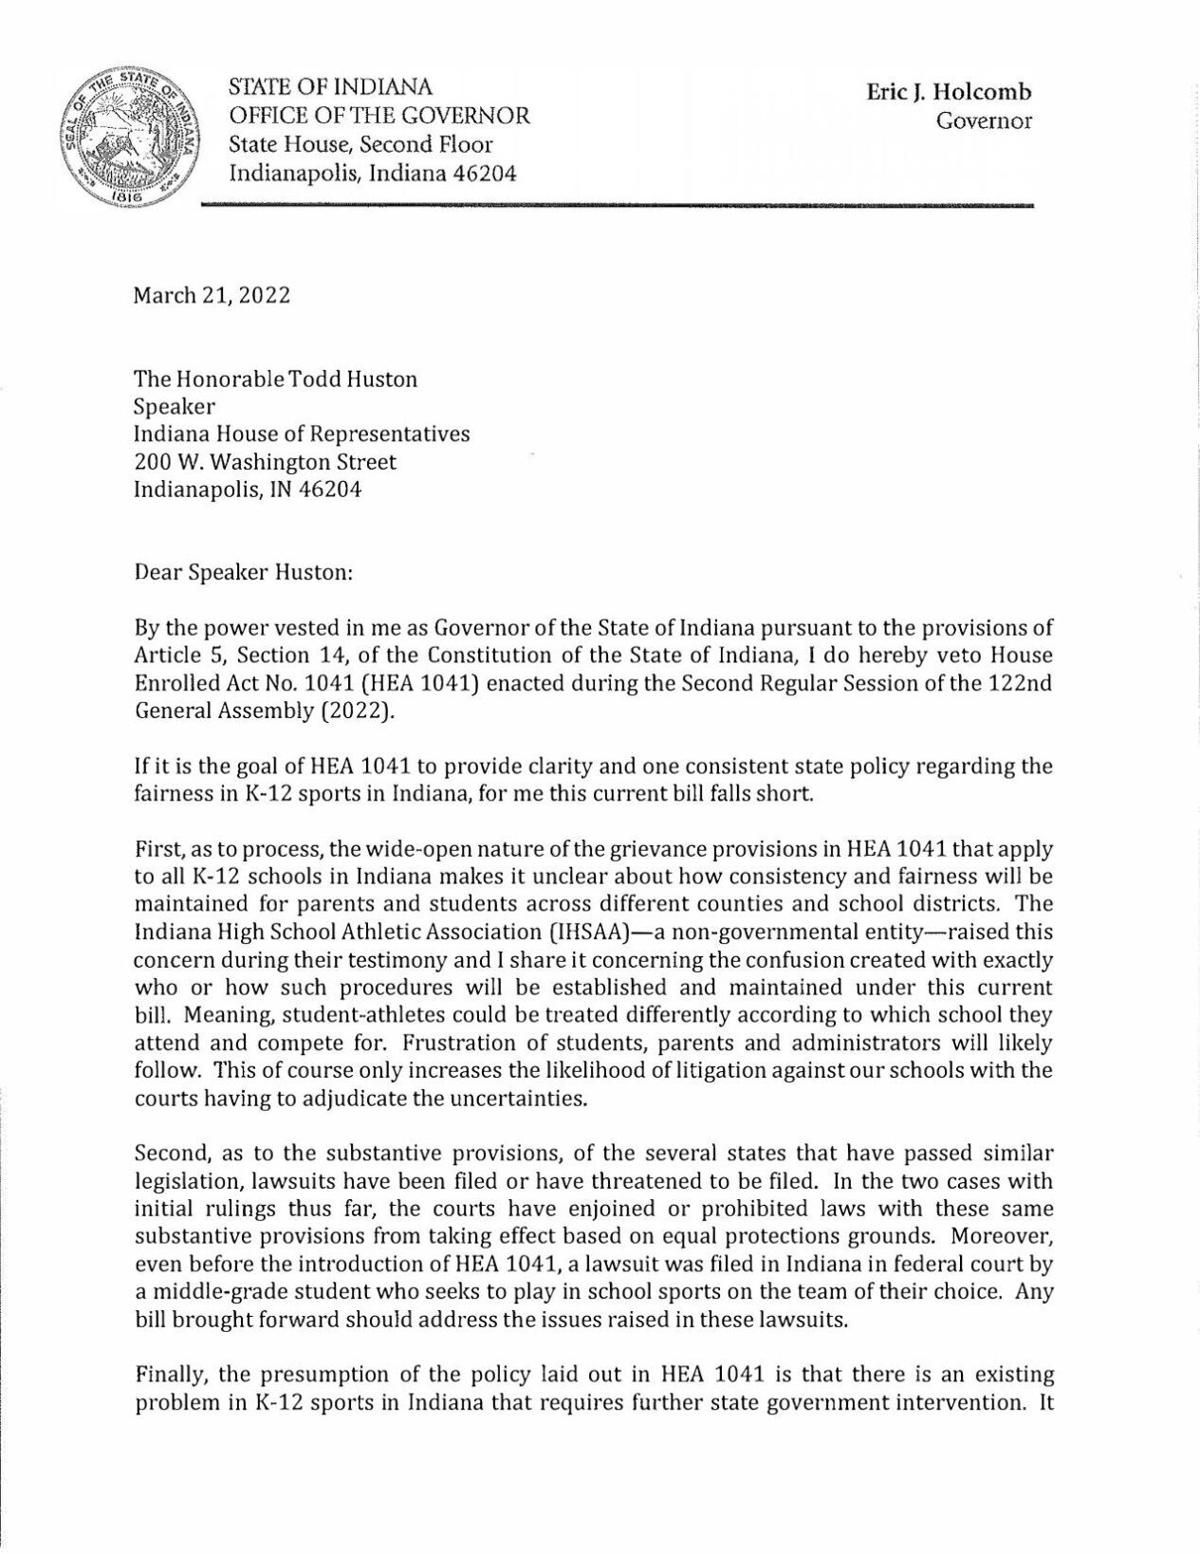 Gov. Holcomb veto message on House Enrolled Act 1041